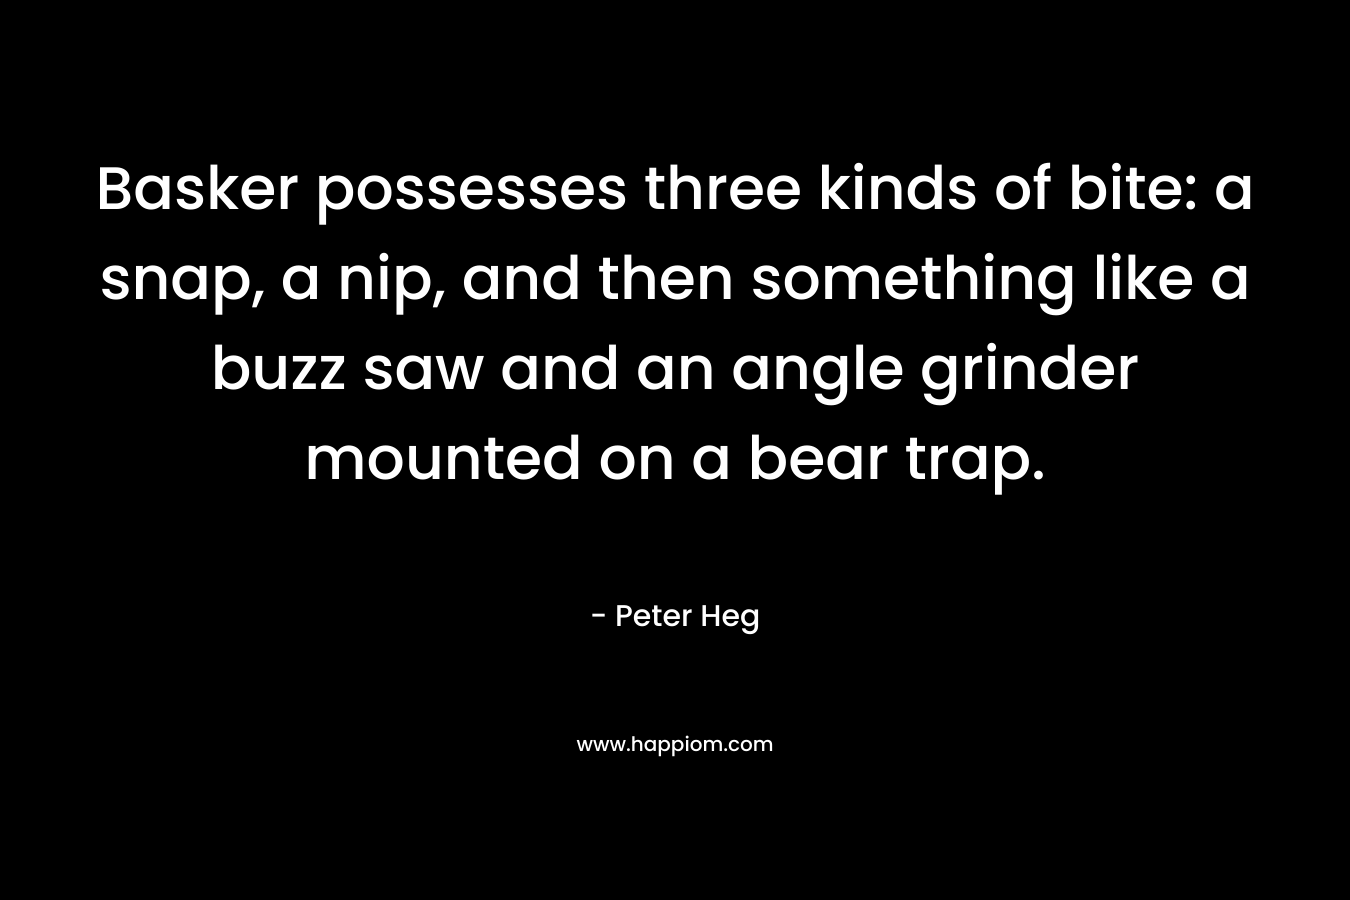 Basker possesses three kinds of bite: a snap, a nip, and then something like a buzz saw and an angle grinder mounted on a bear trap. – Peter Heg